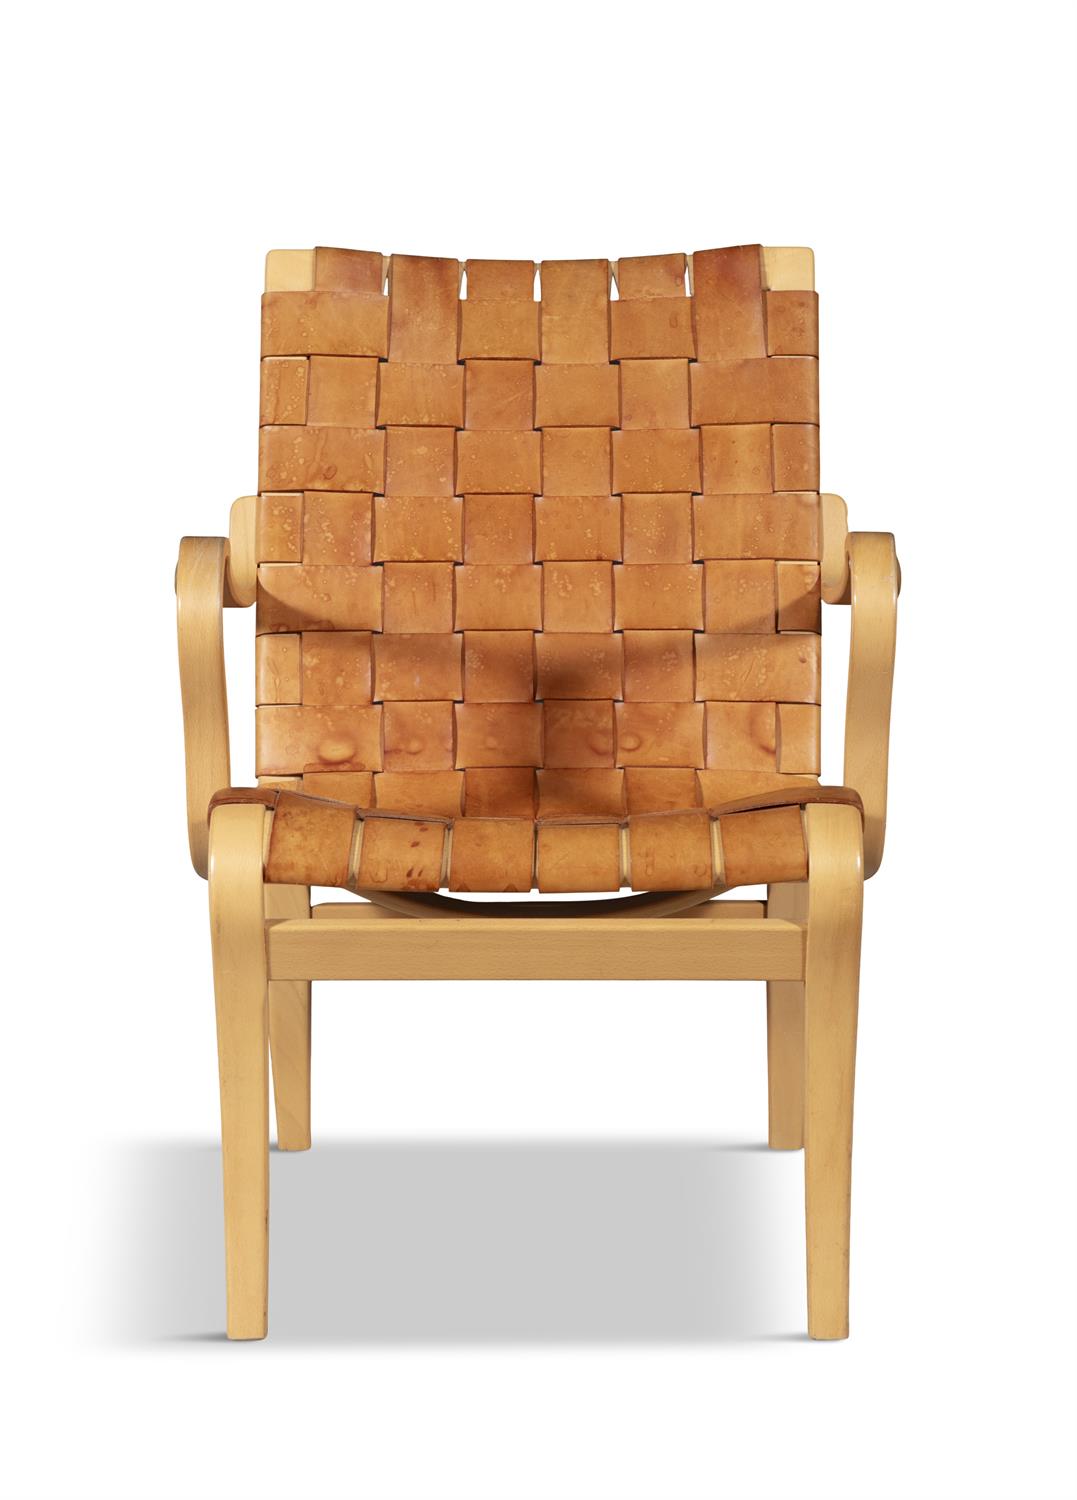 BRUNO MATHSSON Eva armchair by Bruno Mathsson in beech and leather. c.1970. 60 x 65 x 80cm(h); - Image 2 of 5